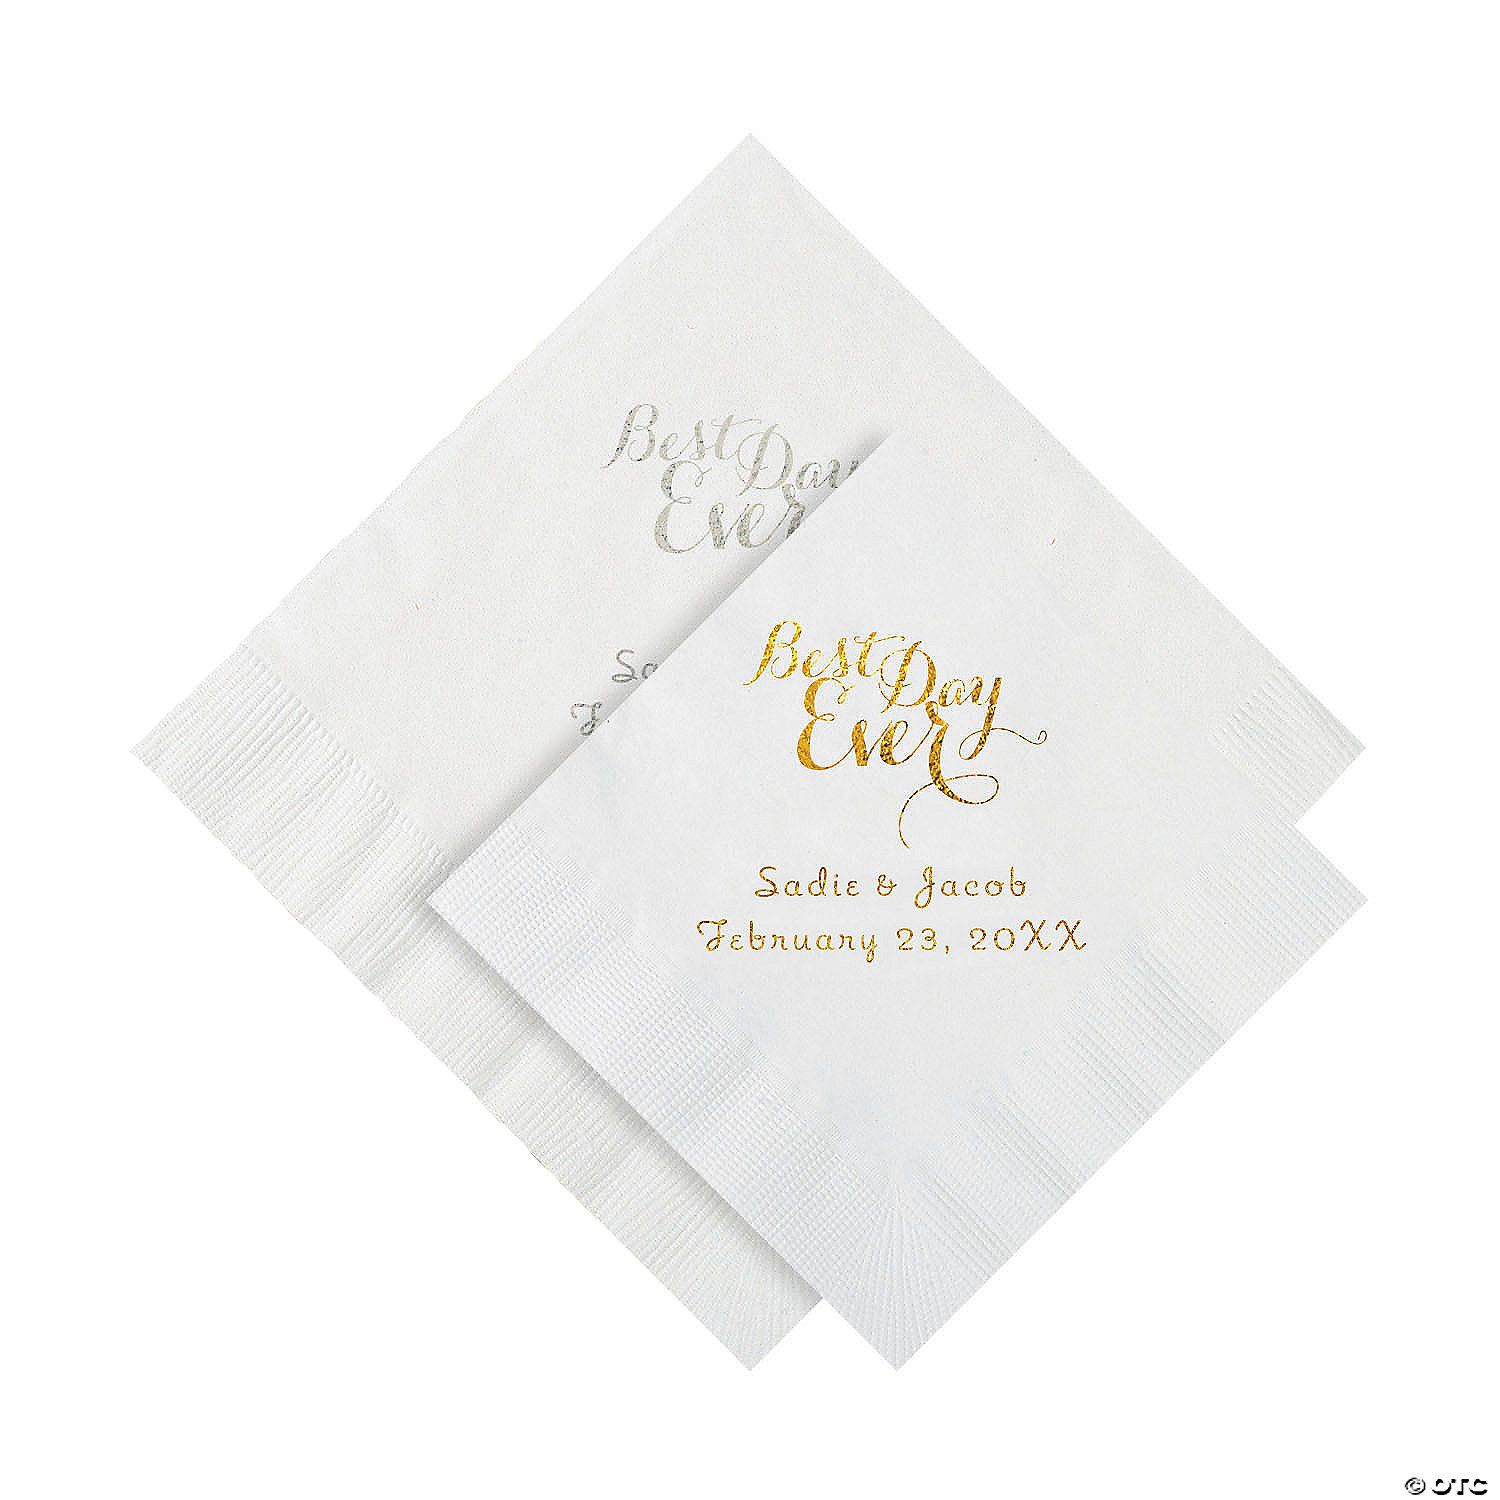 Personalized Party Favors and Matching Personalized Napkins 100 of each. 